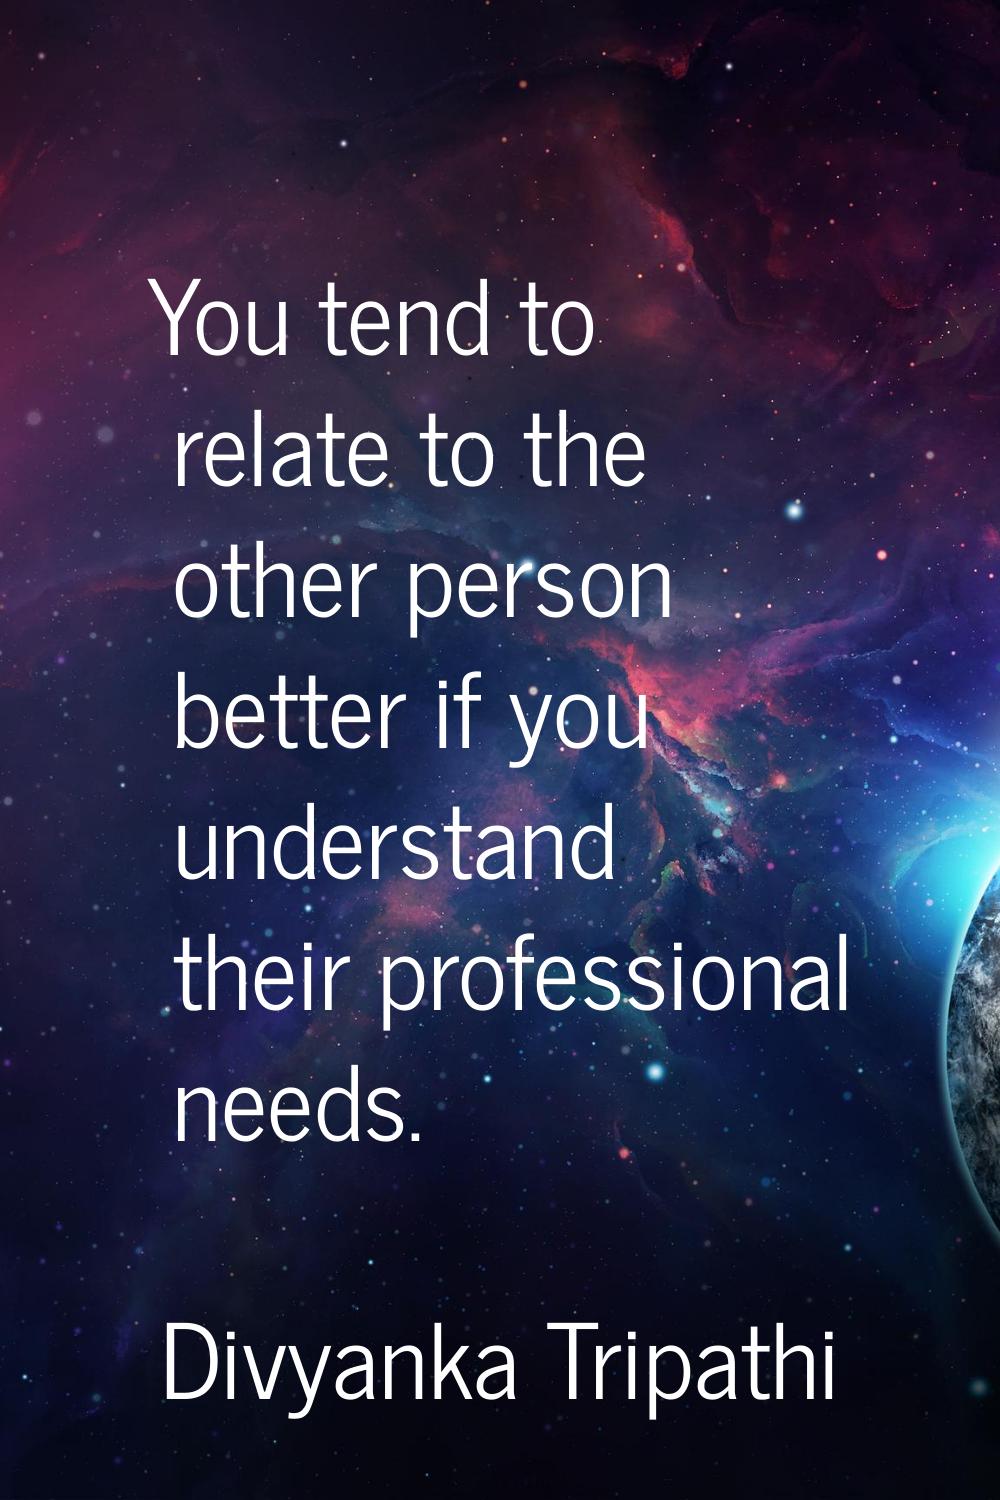 You tend to relate to the other person better if you understand their professional needs.